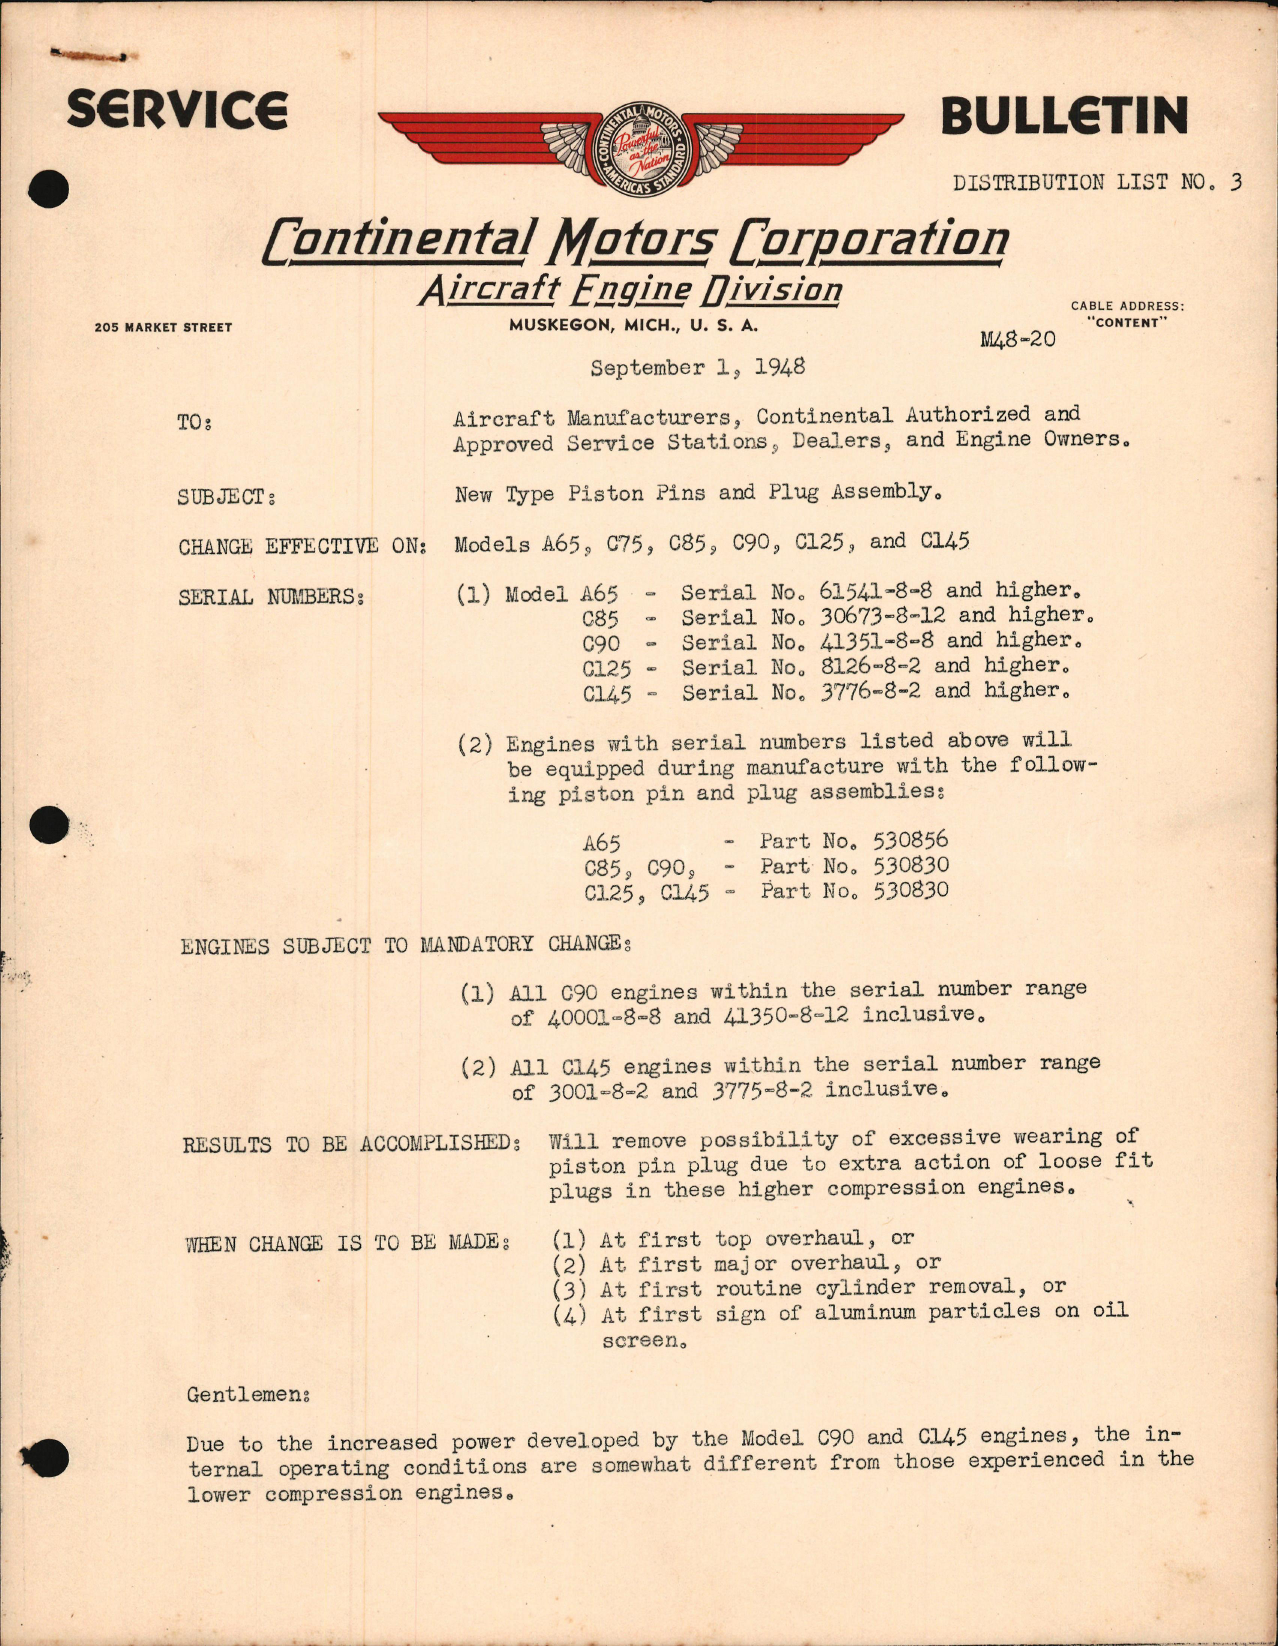 Sample page 1 from AirCorps Library document: New Type Piston Pins and Plug Assembly